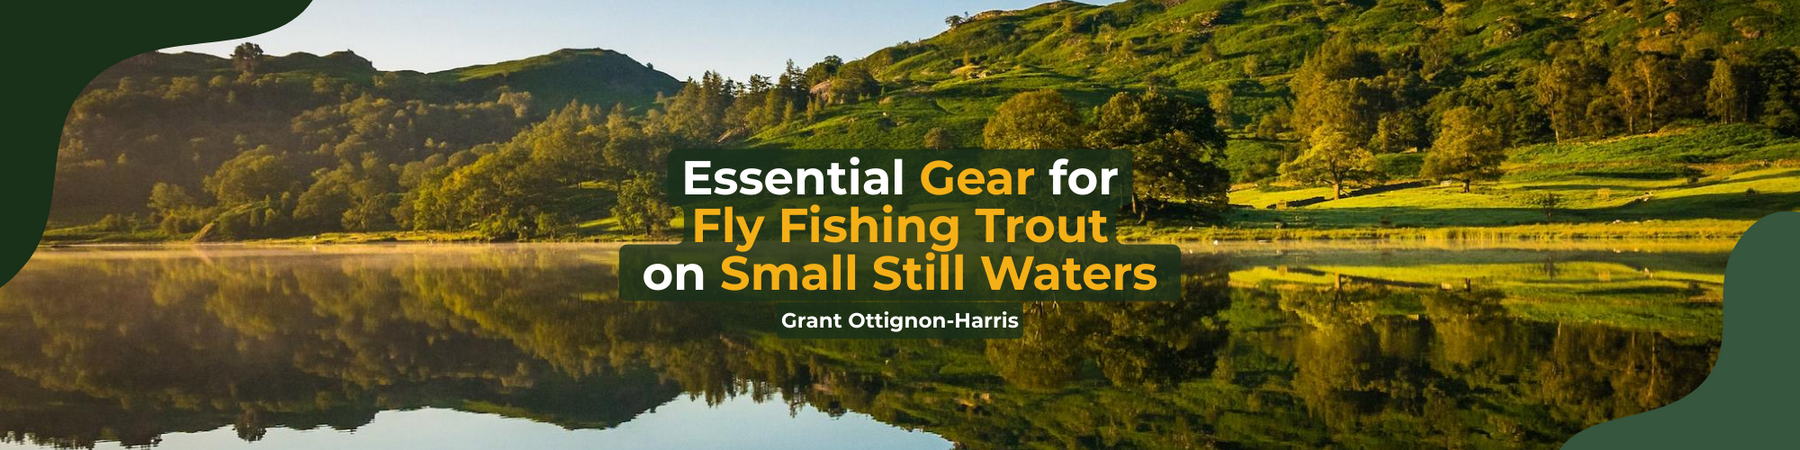 What gear do you need for fly fishing trout in small still waters?